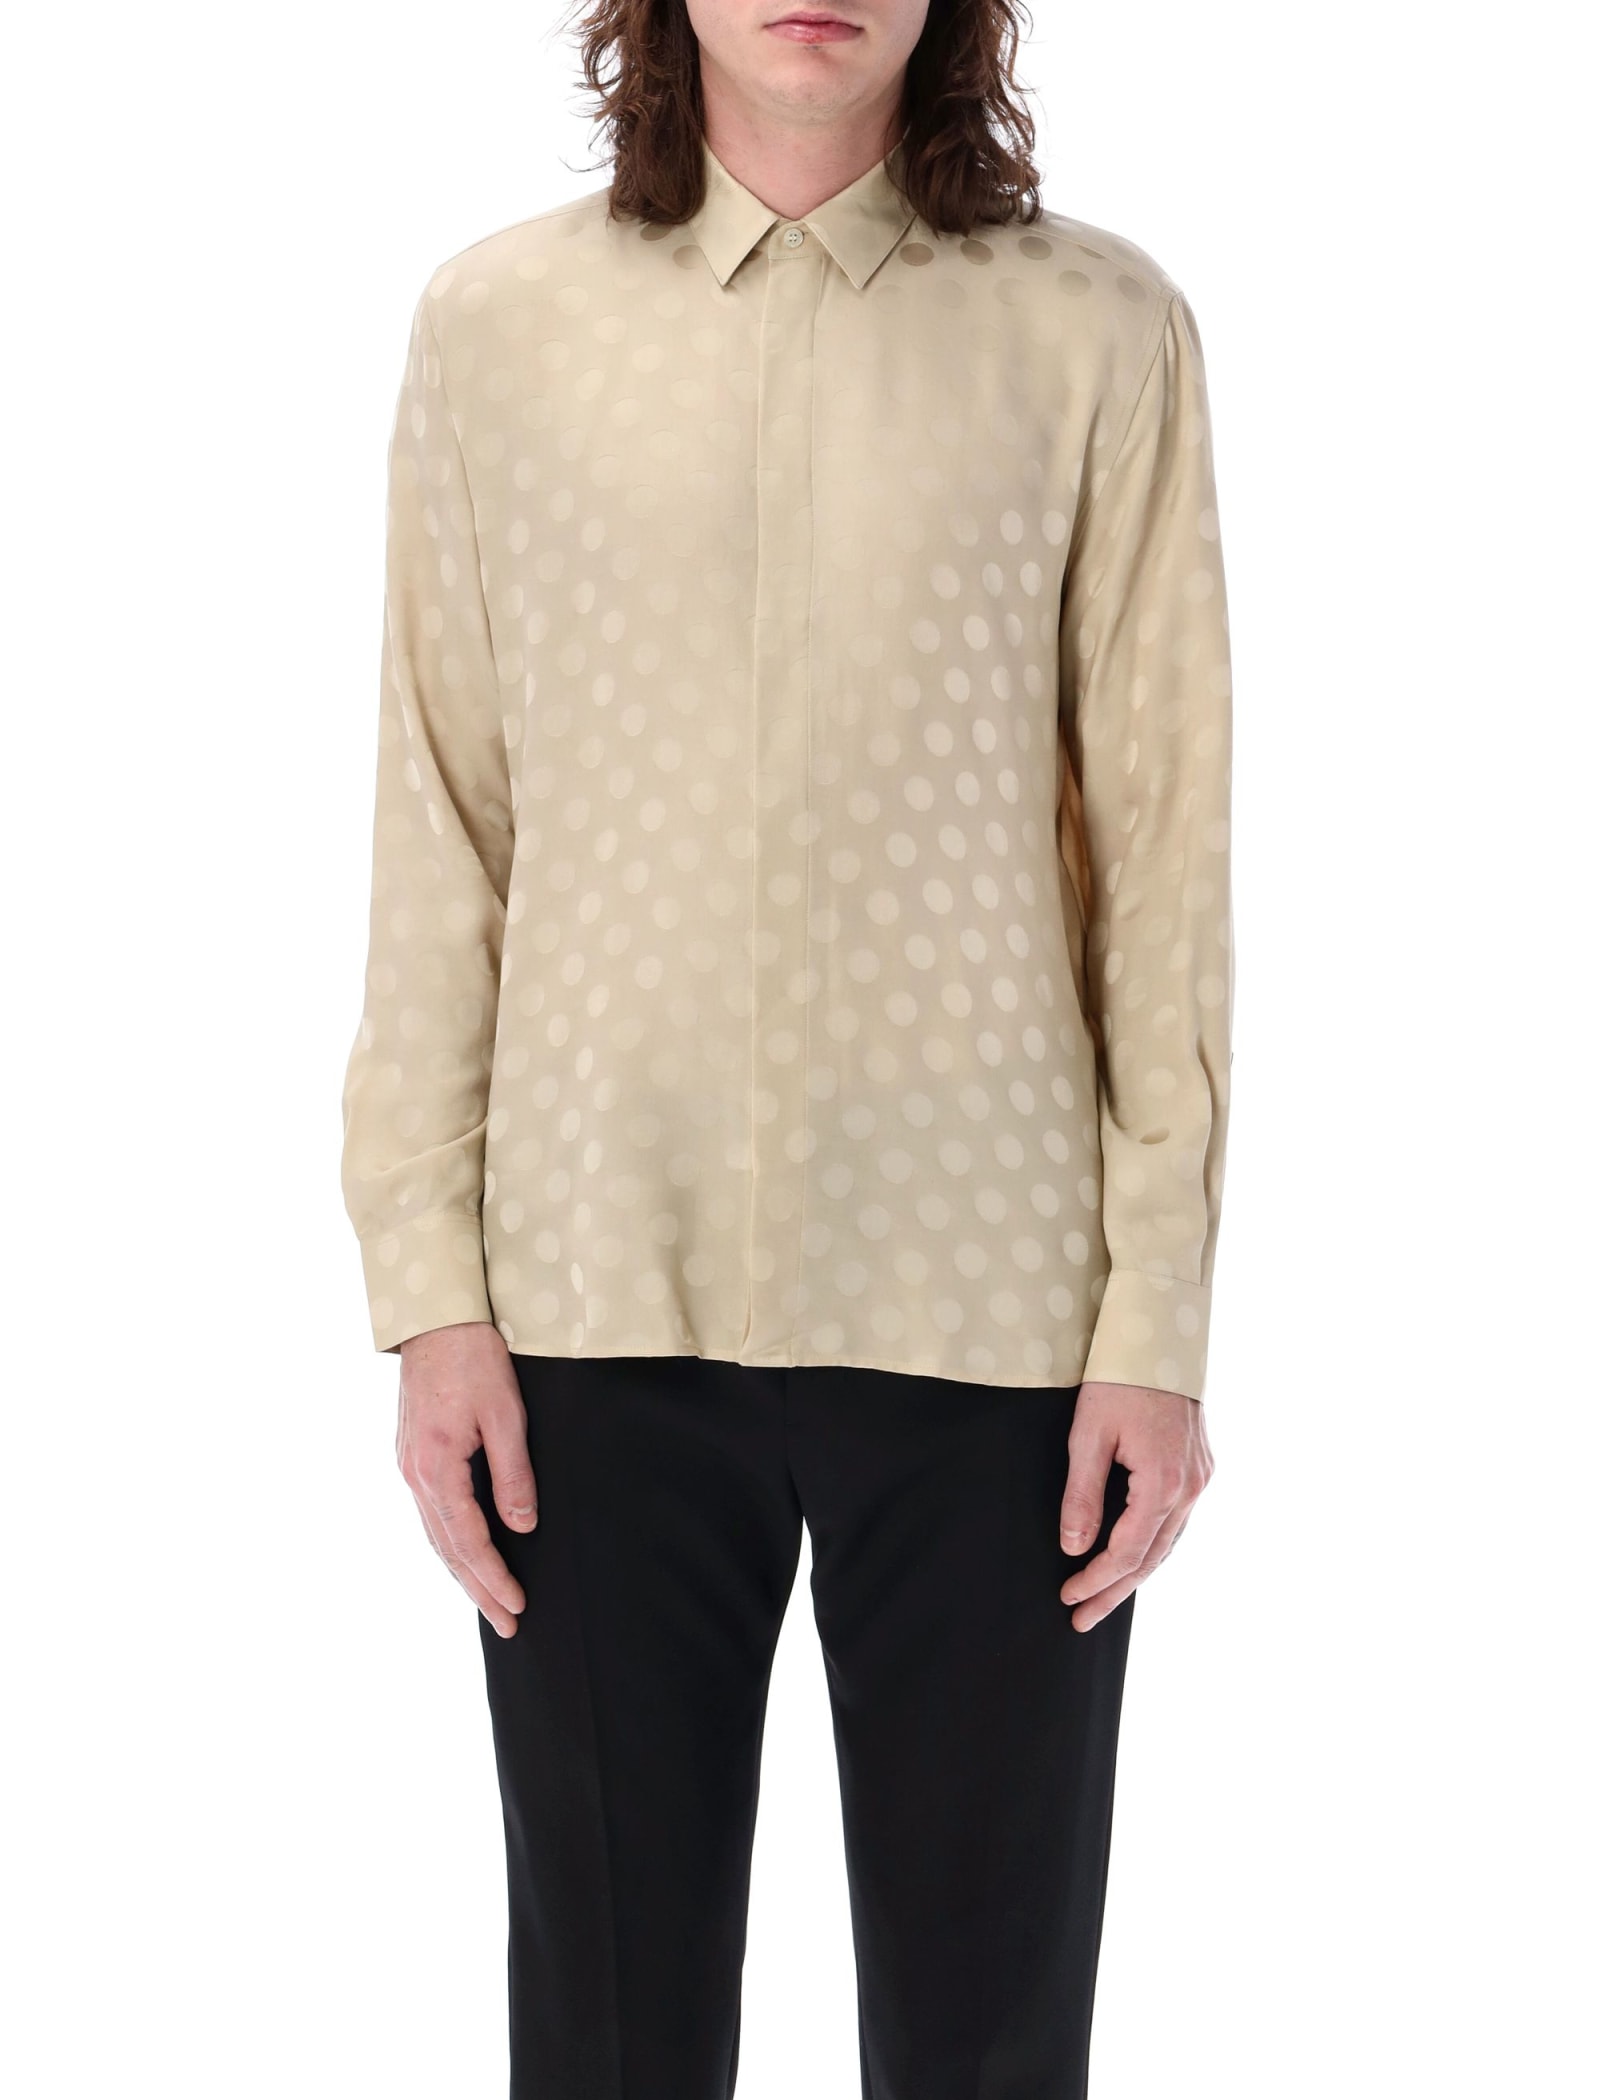 SAINT LAURENT SHIRT IN DOTTED SHINY AND MATTE SILK